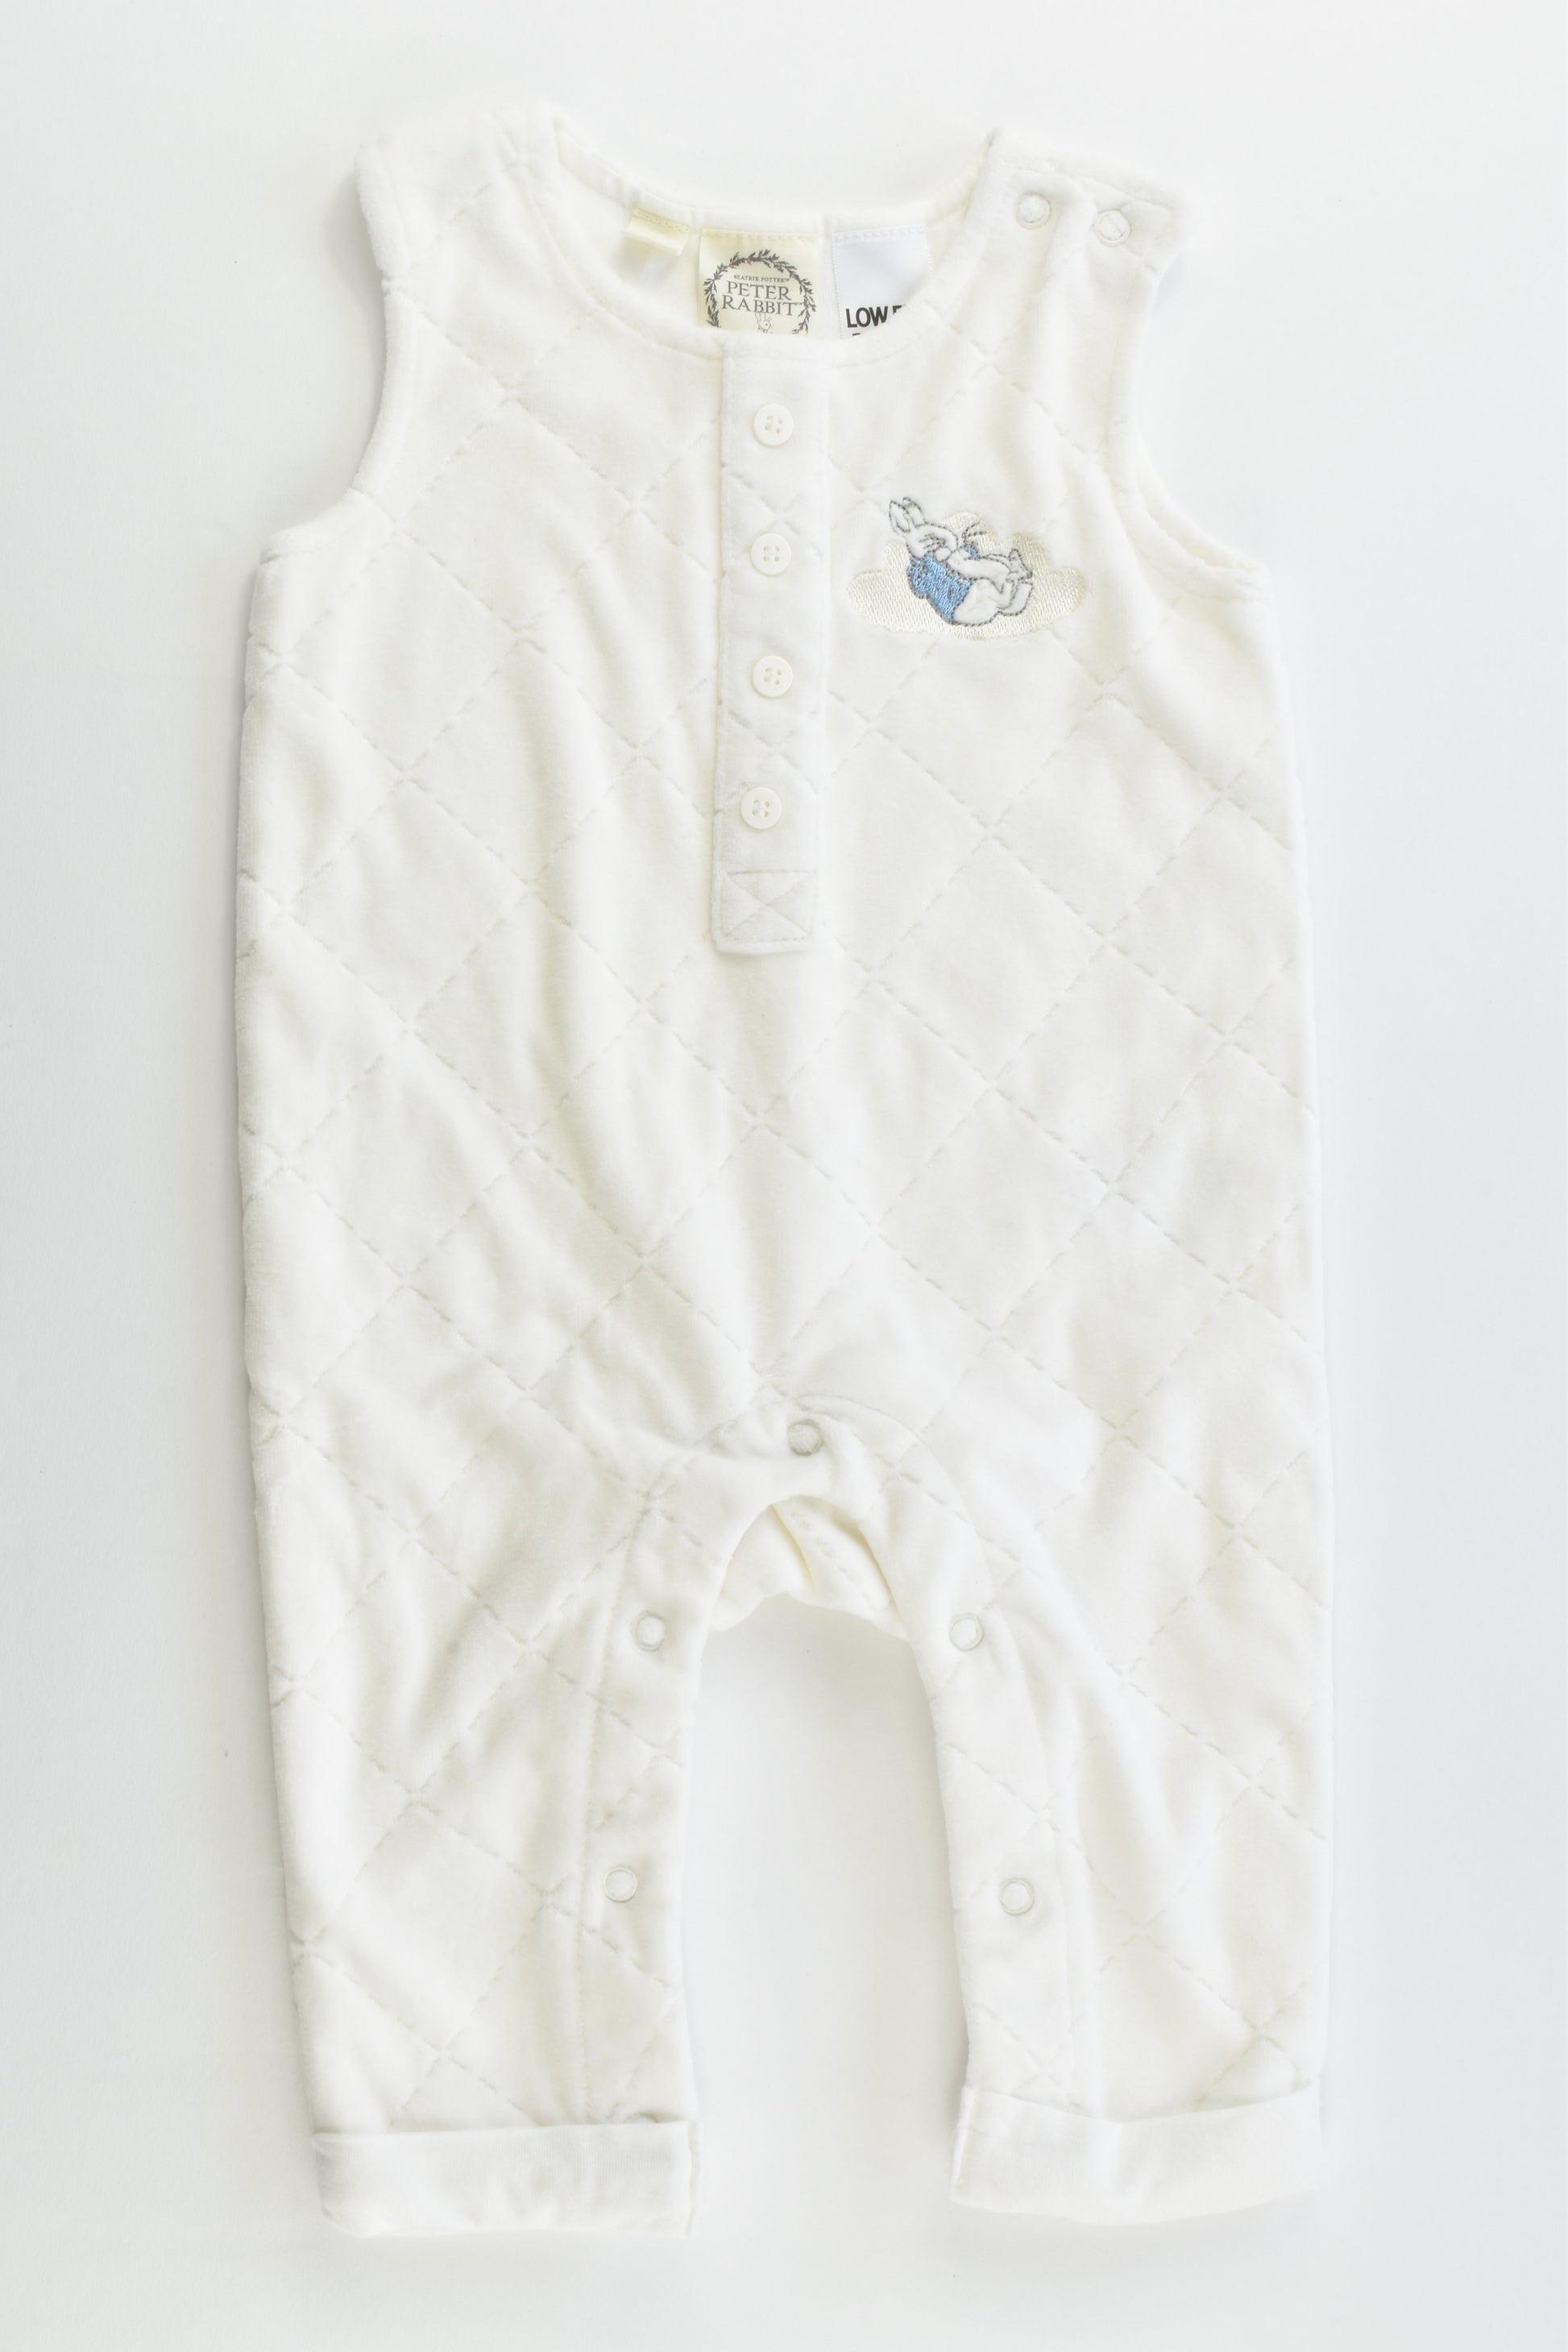 NEW Peter Rabbit Size 00 Lined Velour Overalls